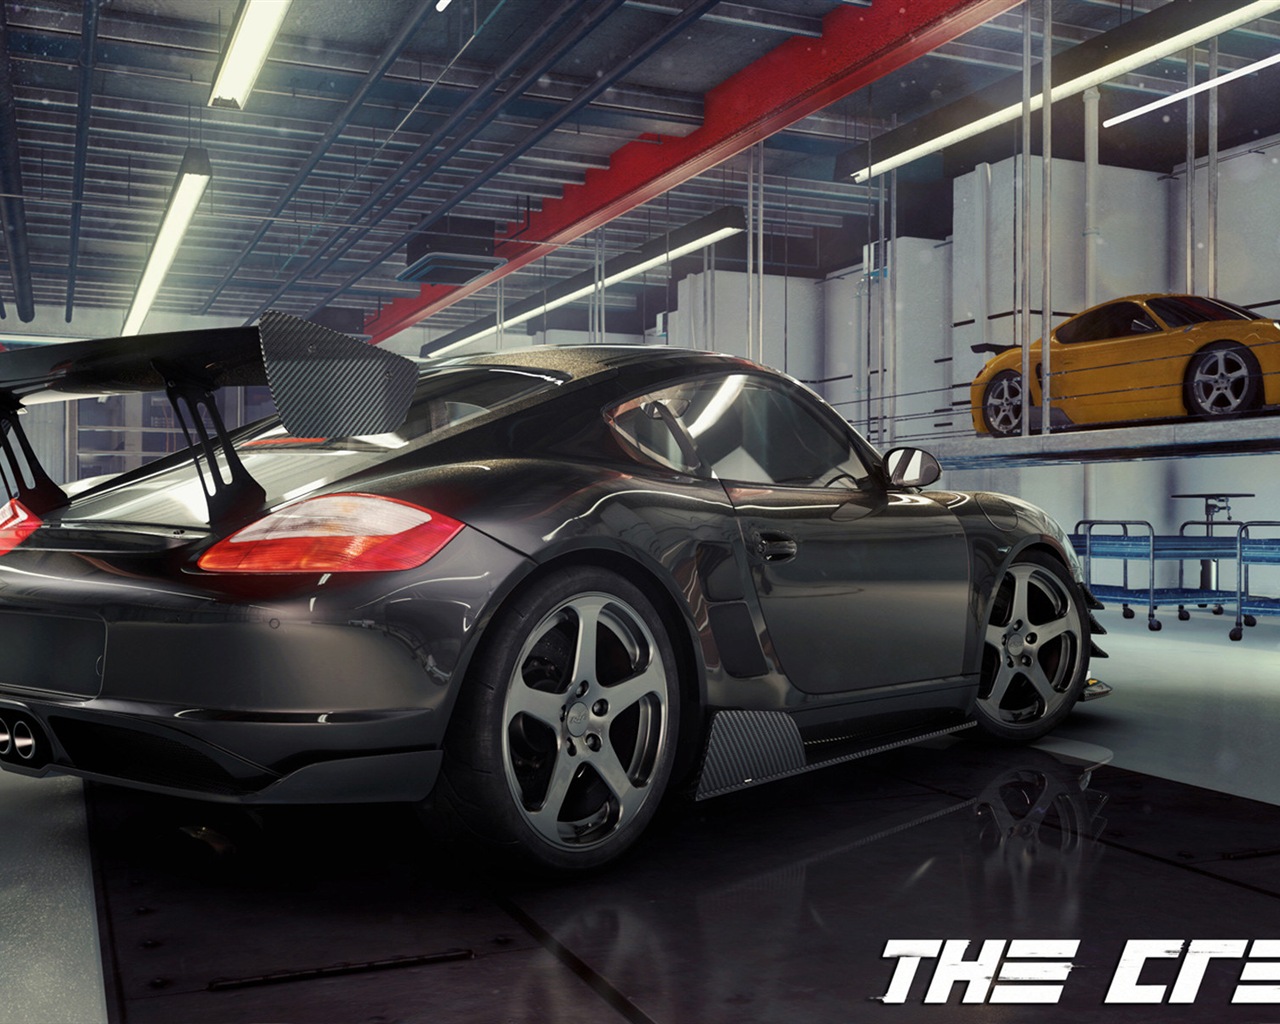 The Crew game HD wallpapers #7 - 1280x1024